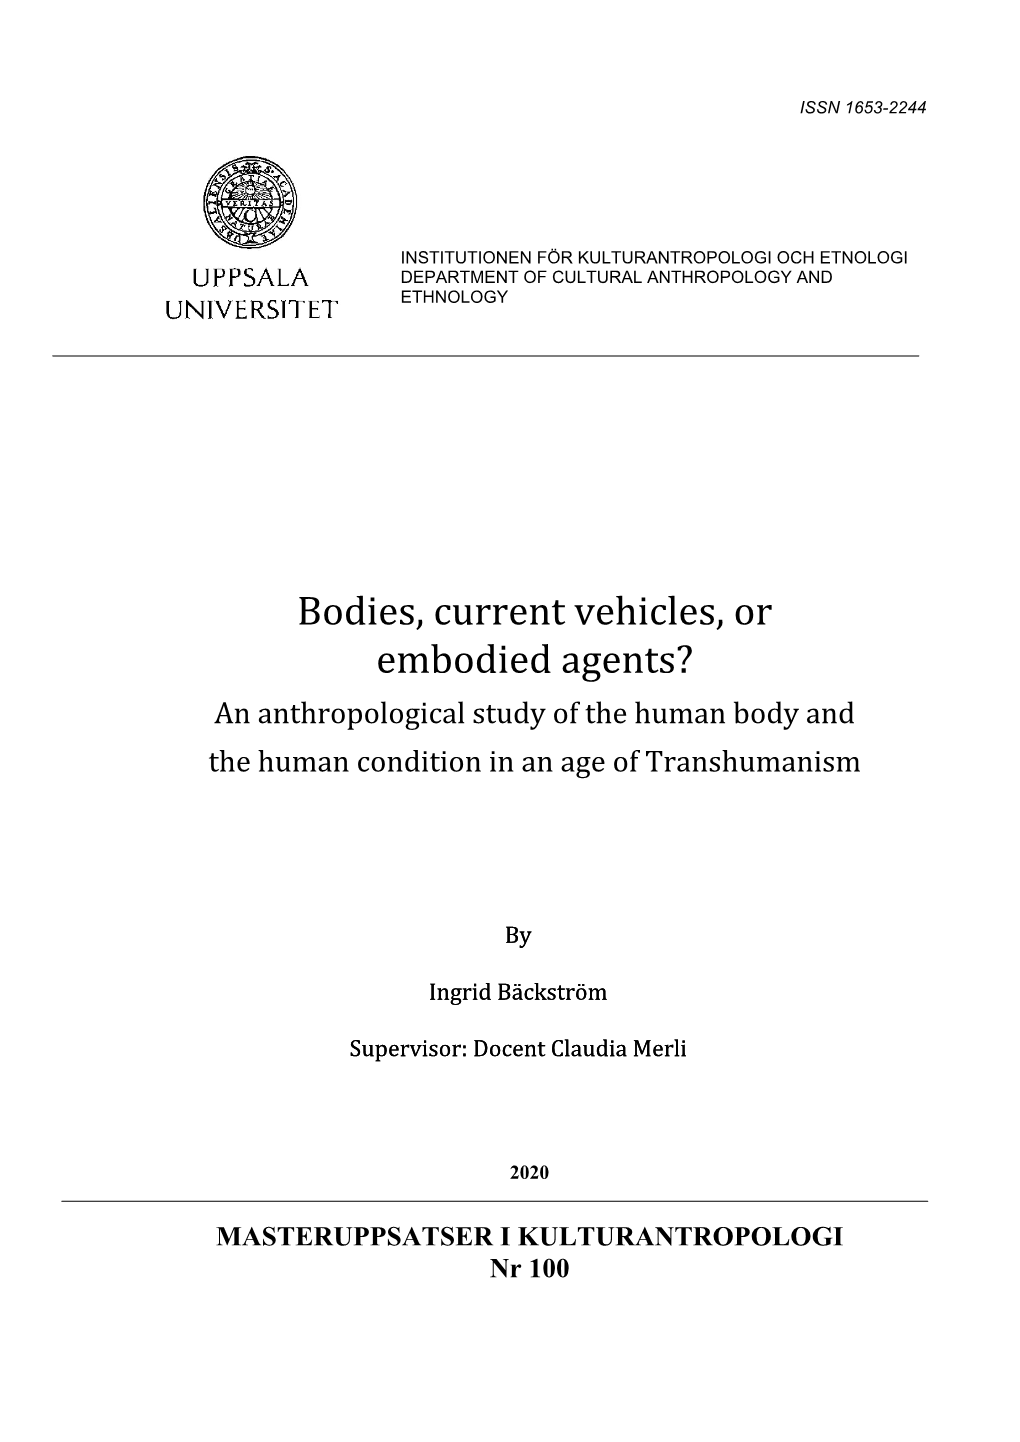 Bodies, Current Vehicles, Or Embodied Agents? an Anthropological Study of the Human Body and the Human Condition in an Age of Transhumanism